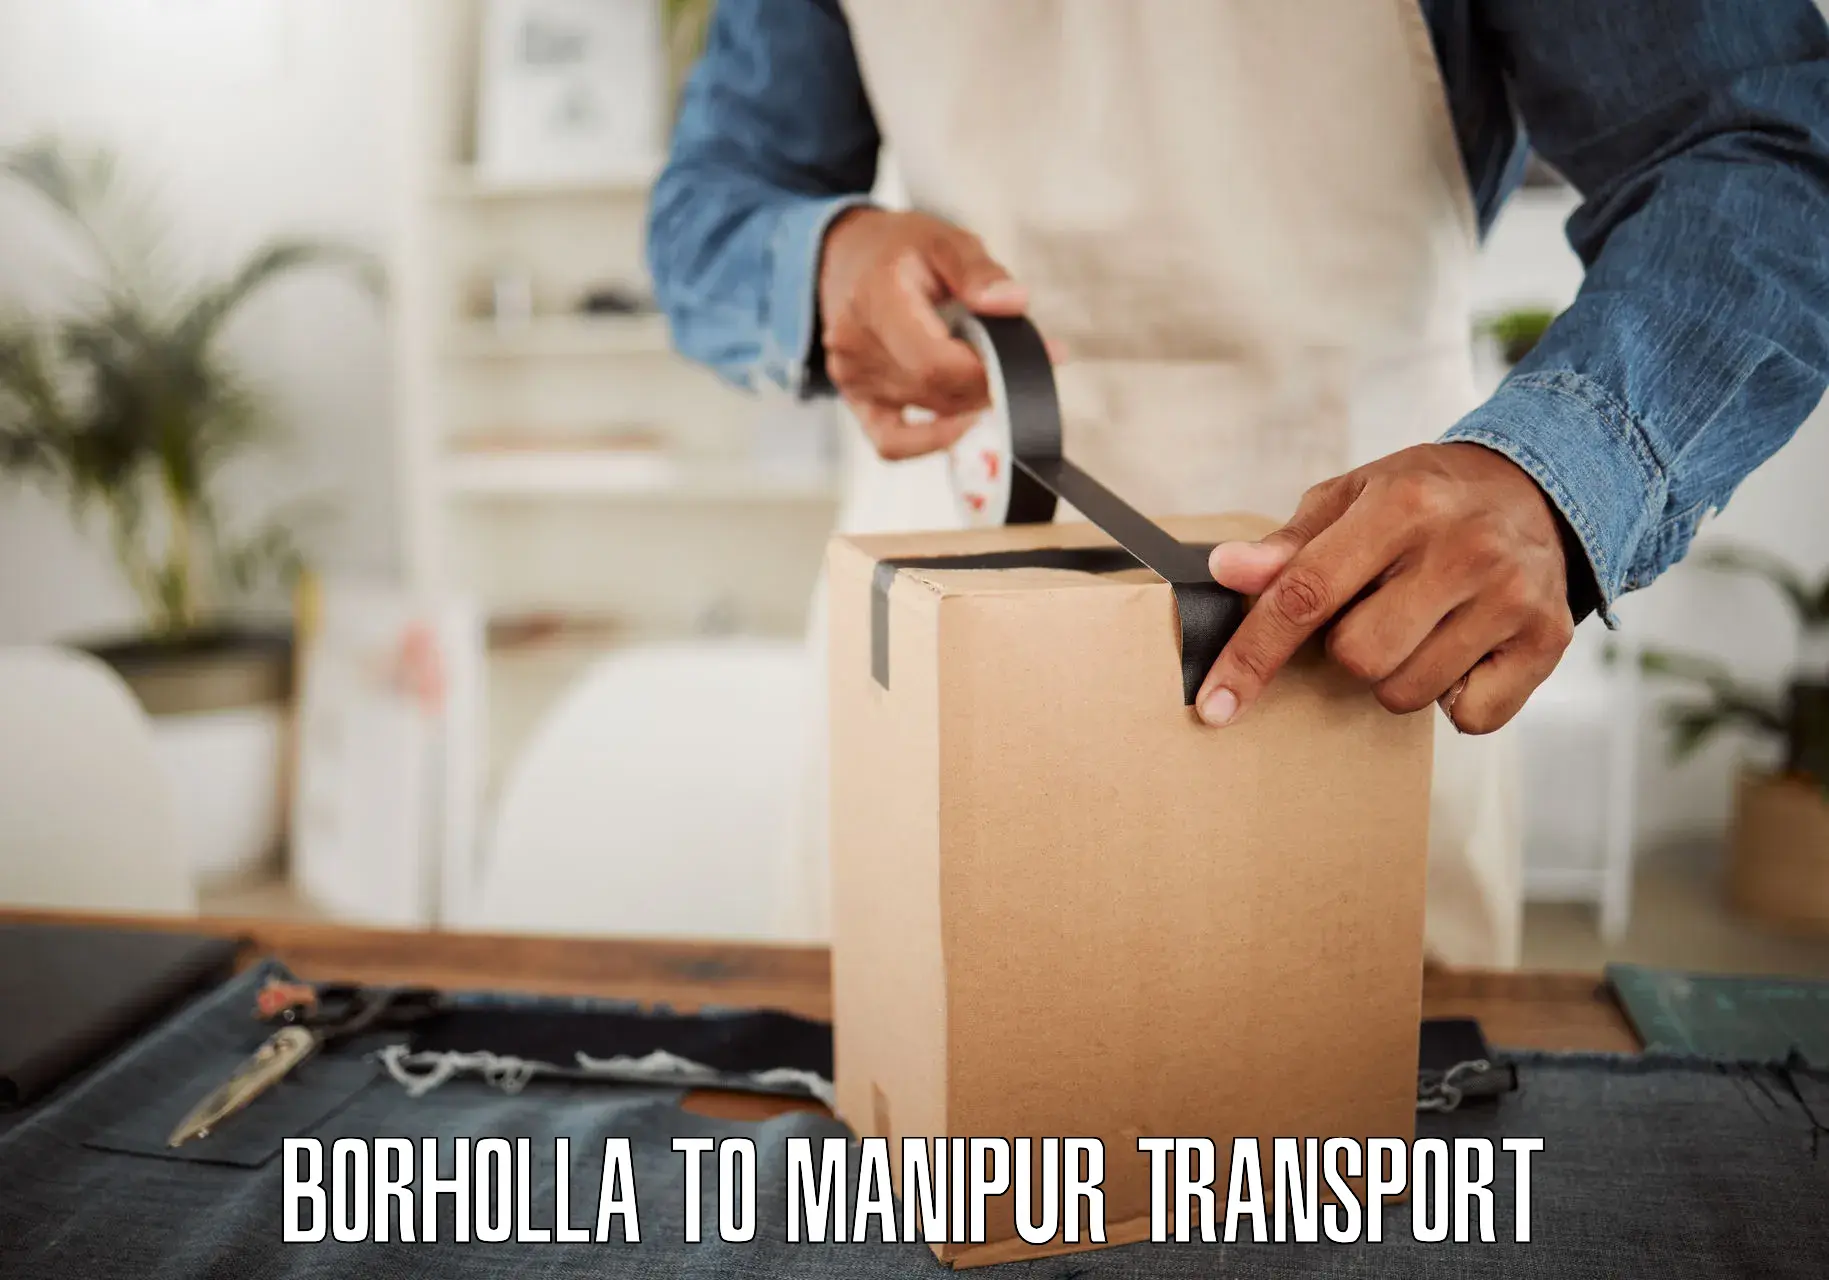 Transport in sharing in Borholla to Imphal